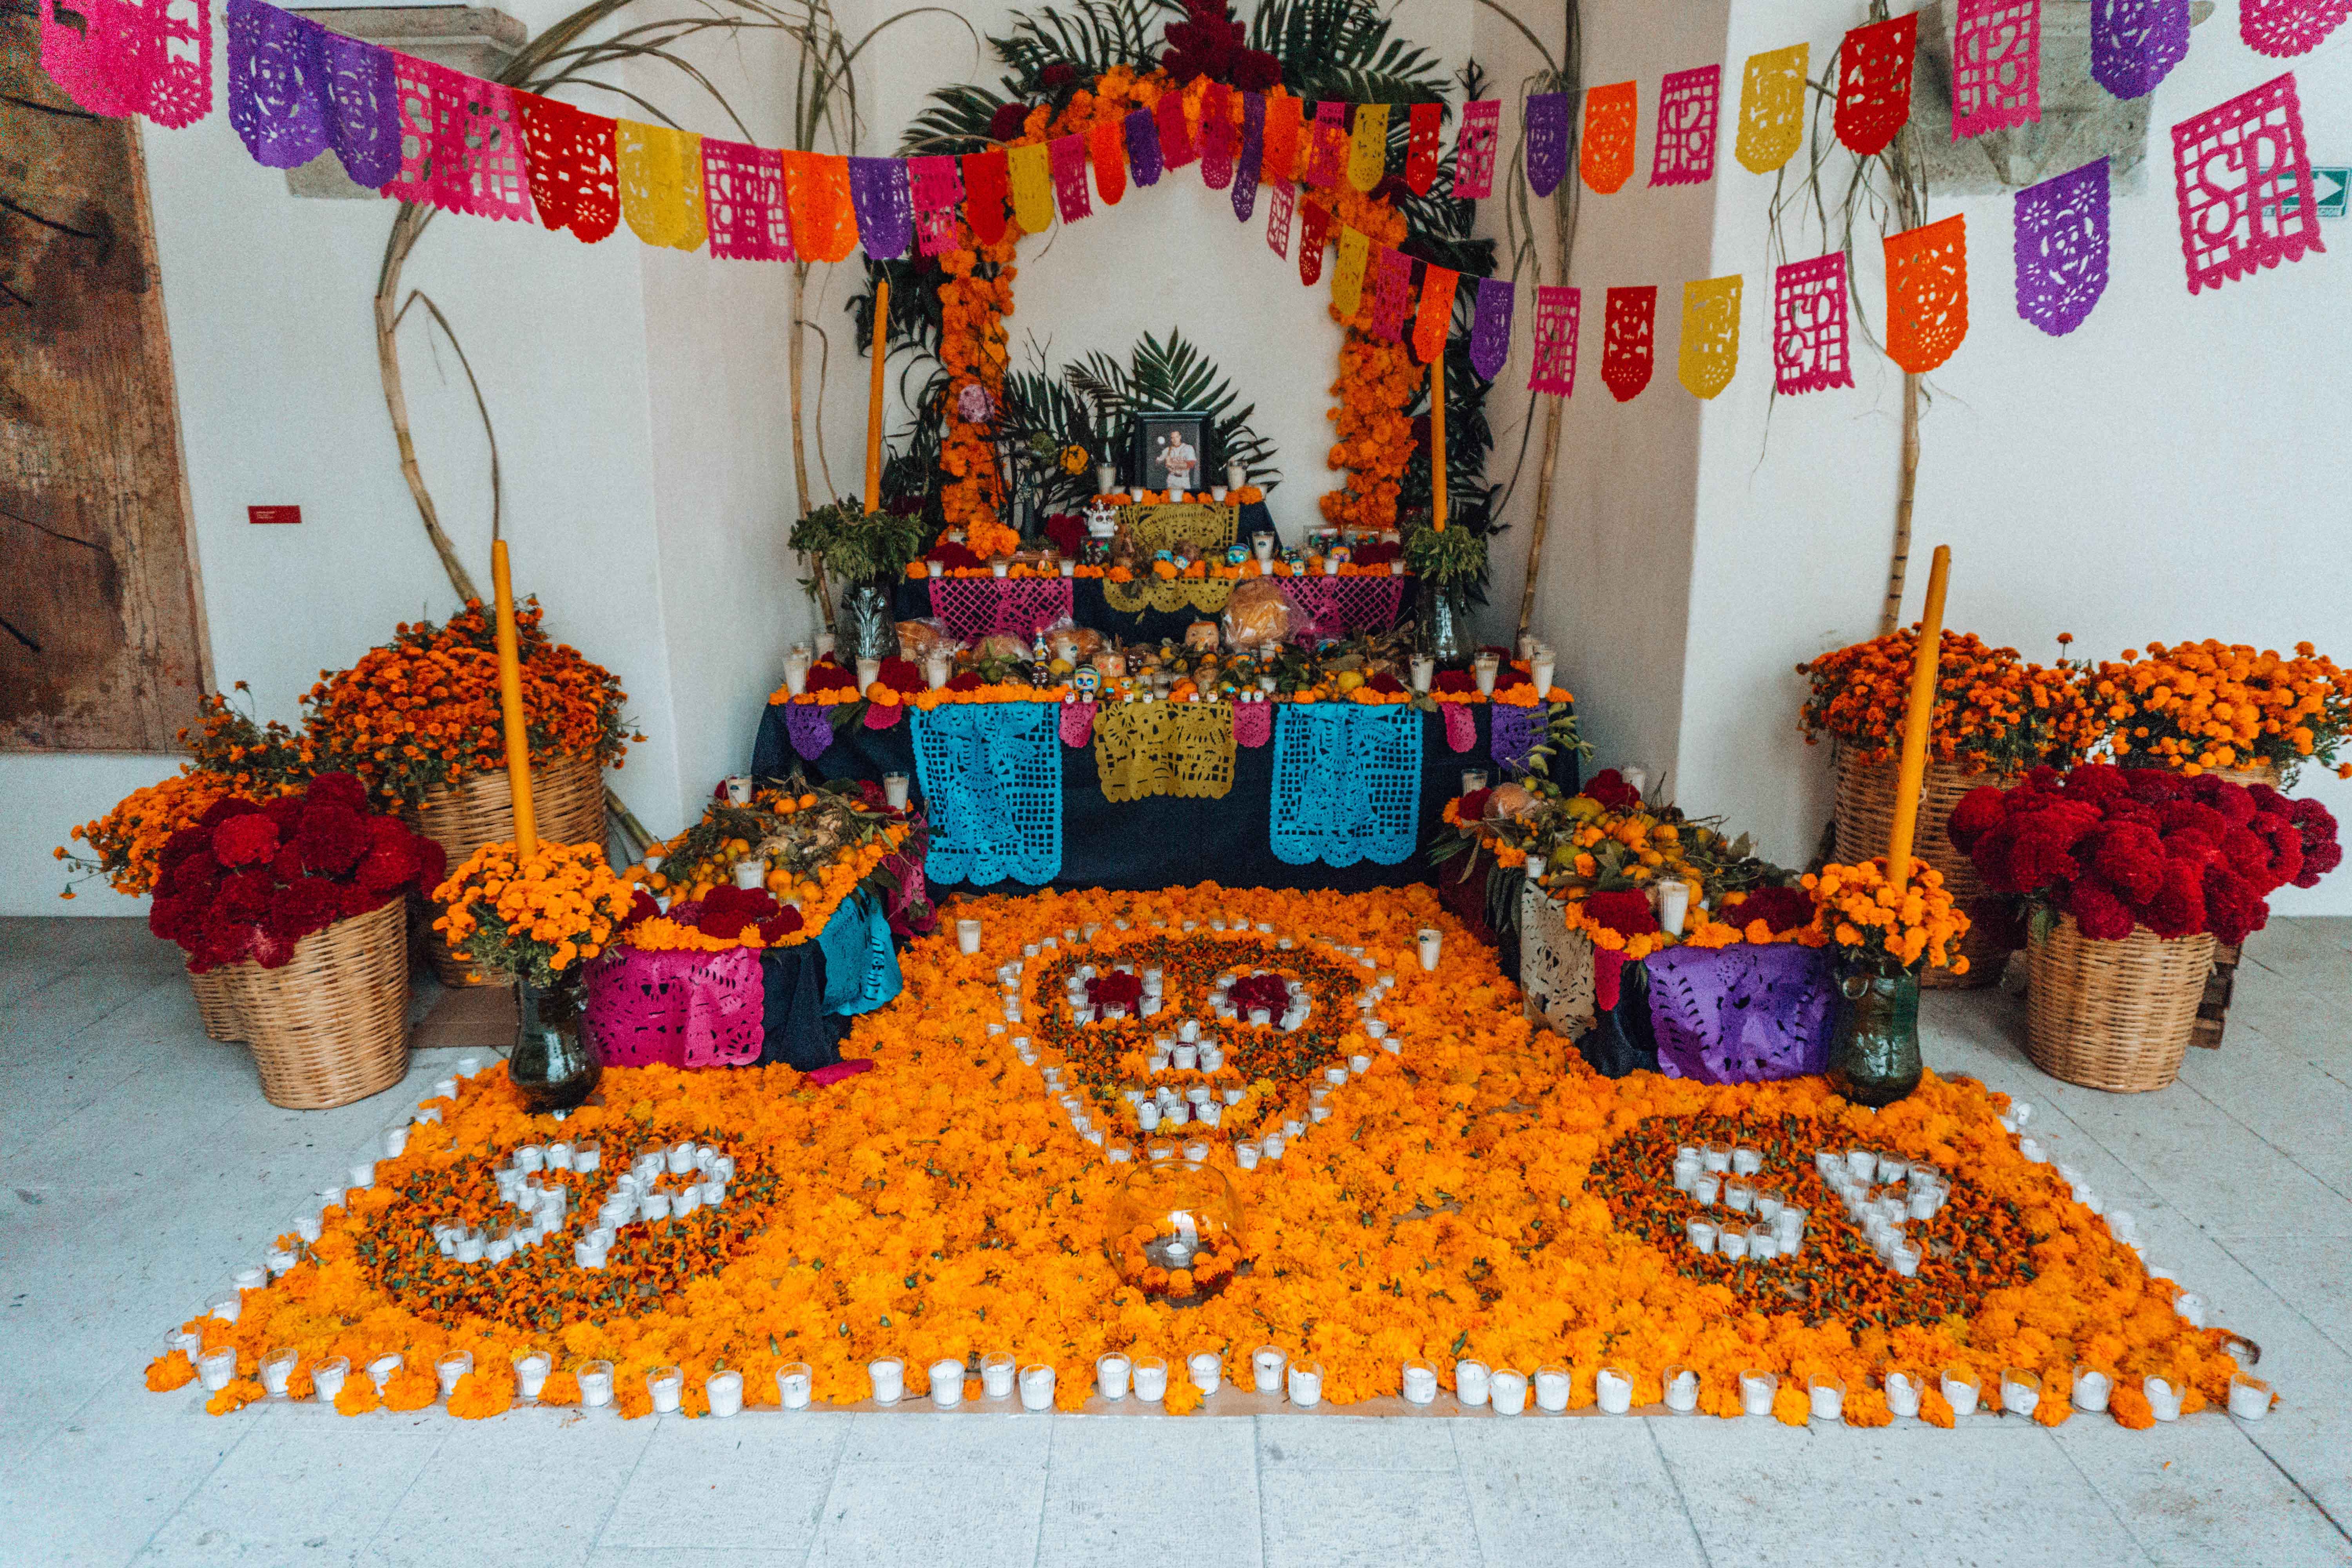 7 Things You Need To Know About the Day of the Dead in Mexico The